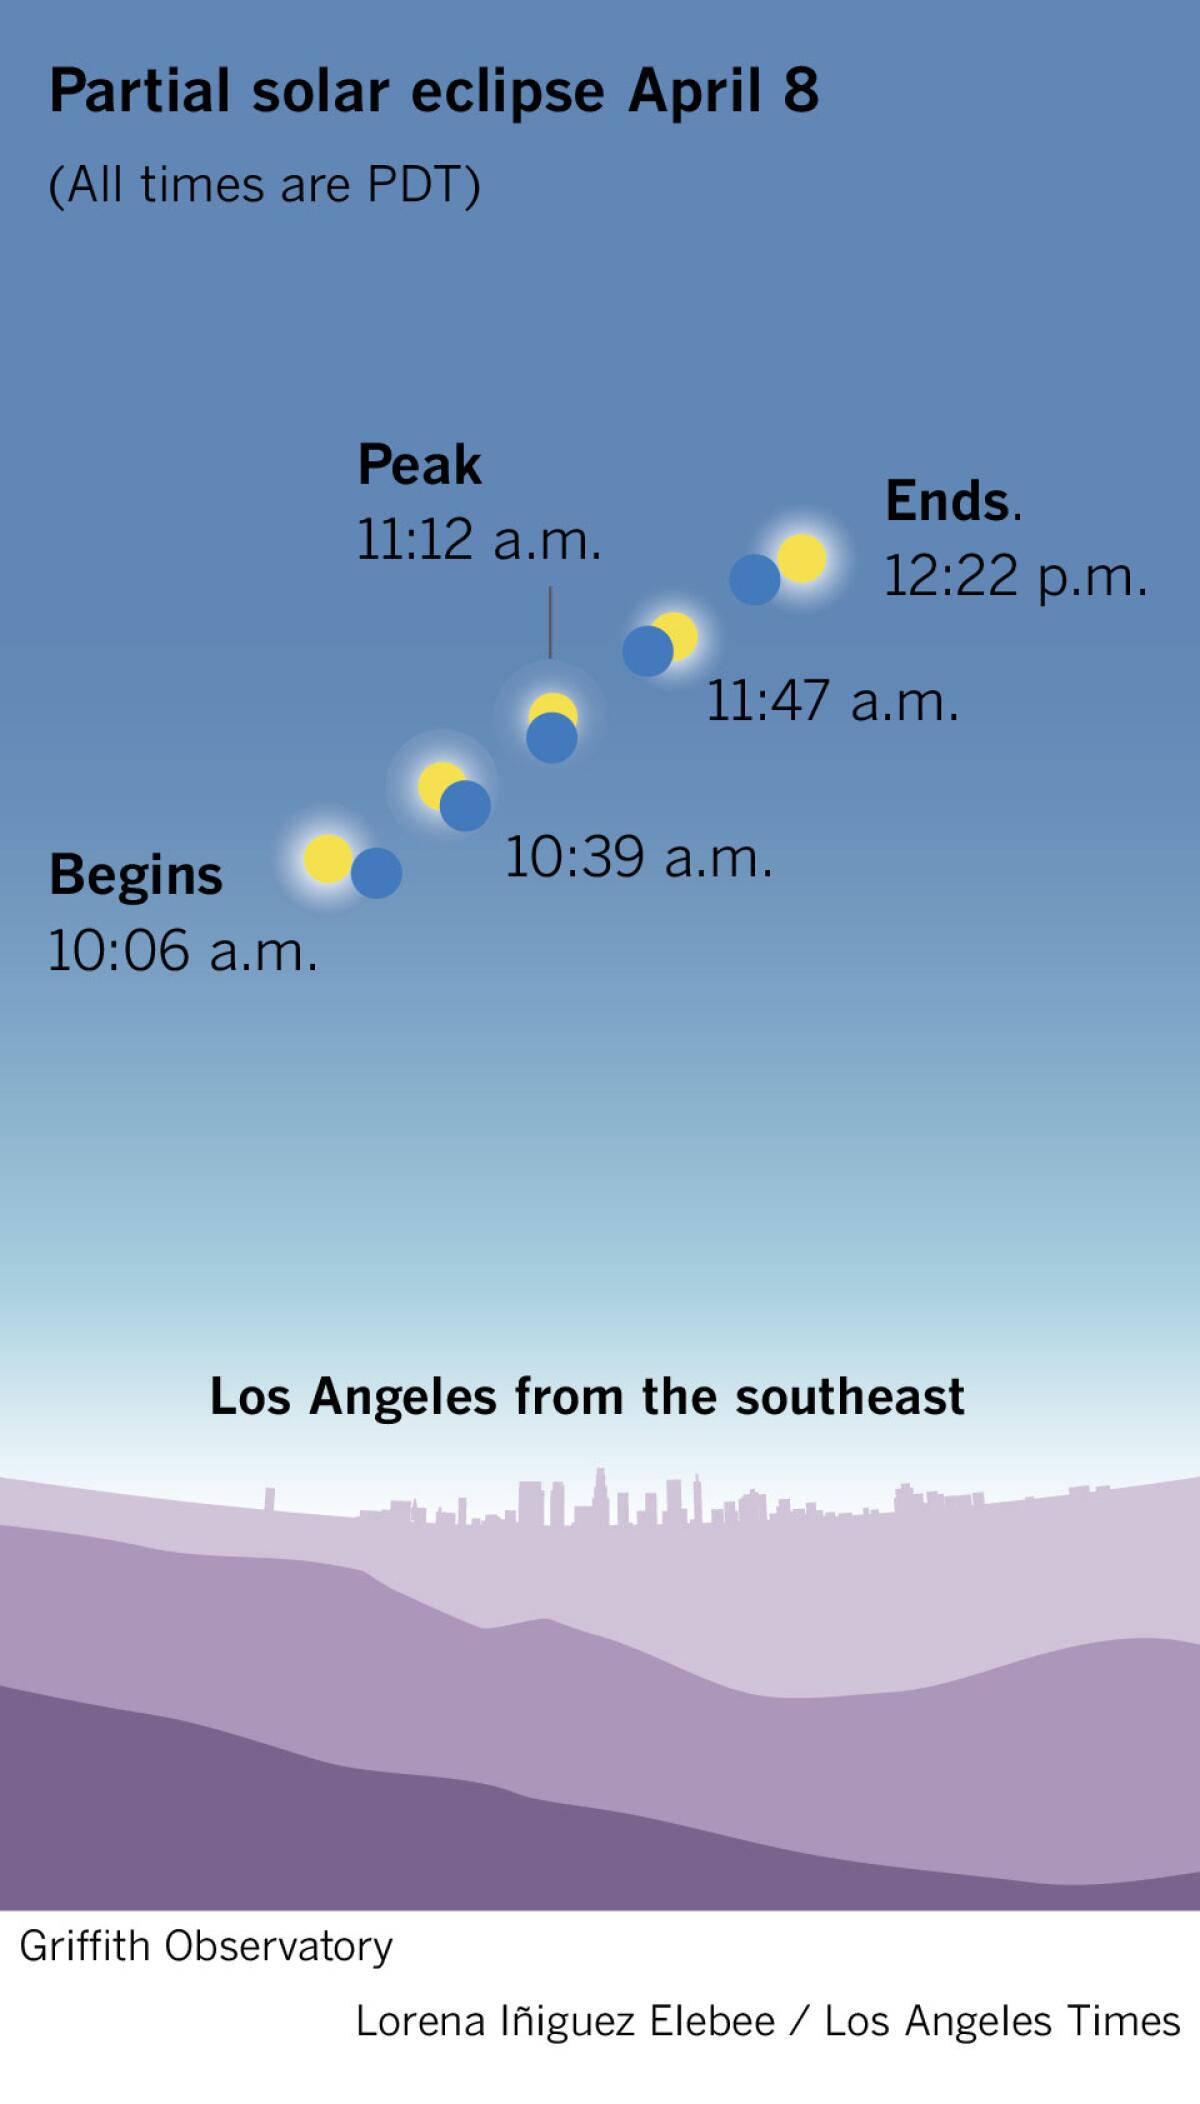 Diagram showing the different times for the partial solar eclipse in Los Angeles from southeast.